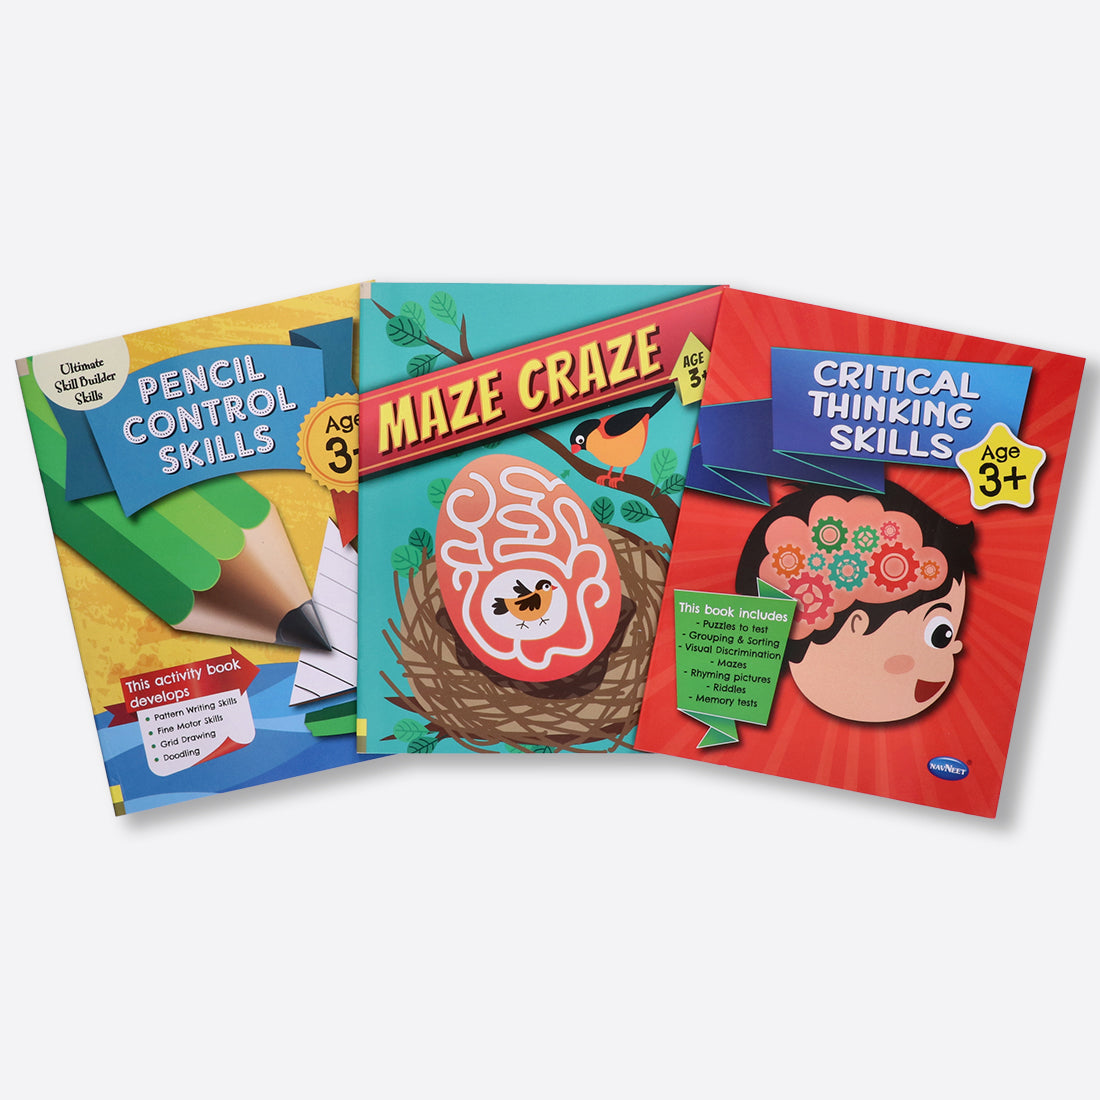 Navneet Pencil Control, Maze & Critical Thinking Activity Books for 3 Year & Above Kids- More than 90 activities- Practice Pattern Writing- Fun Skill Based books